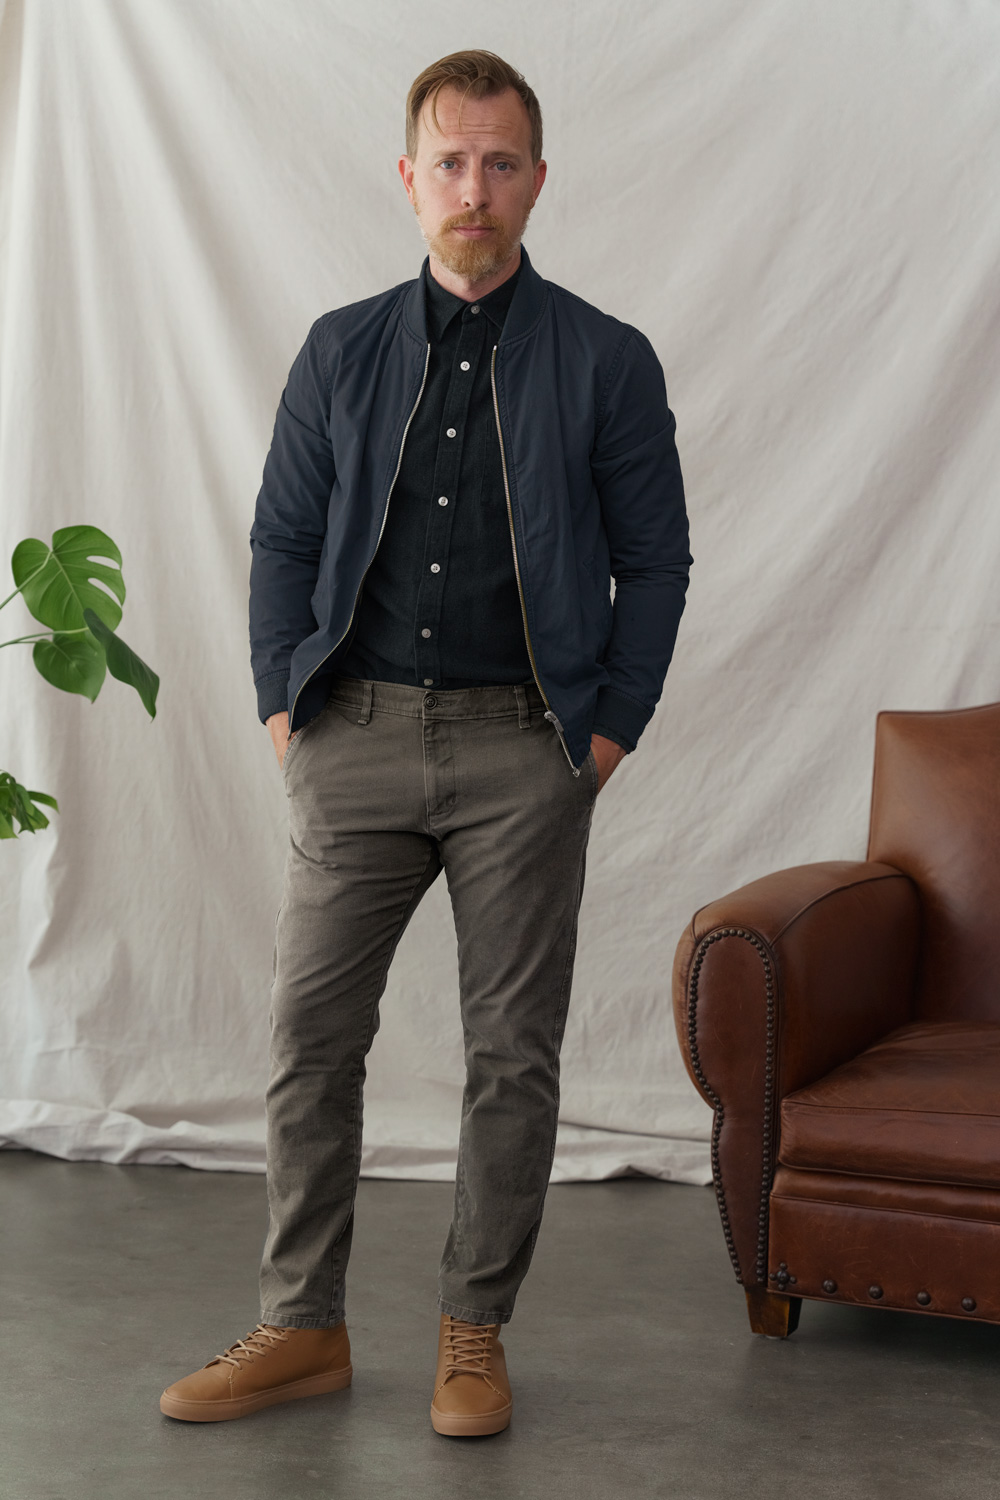 men's smart casual outfit featuring blue bomber jacket, black button up shirt, chinos, and tan high top sneakers